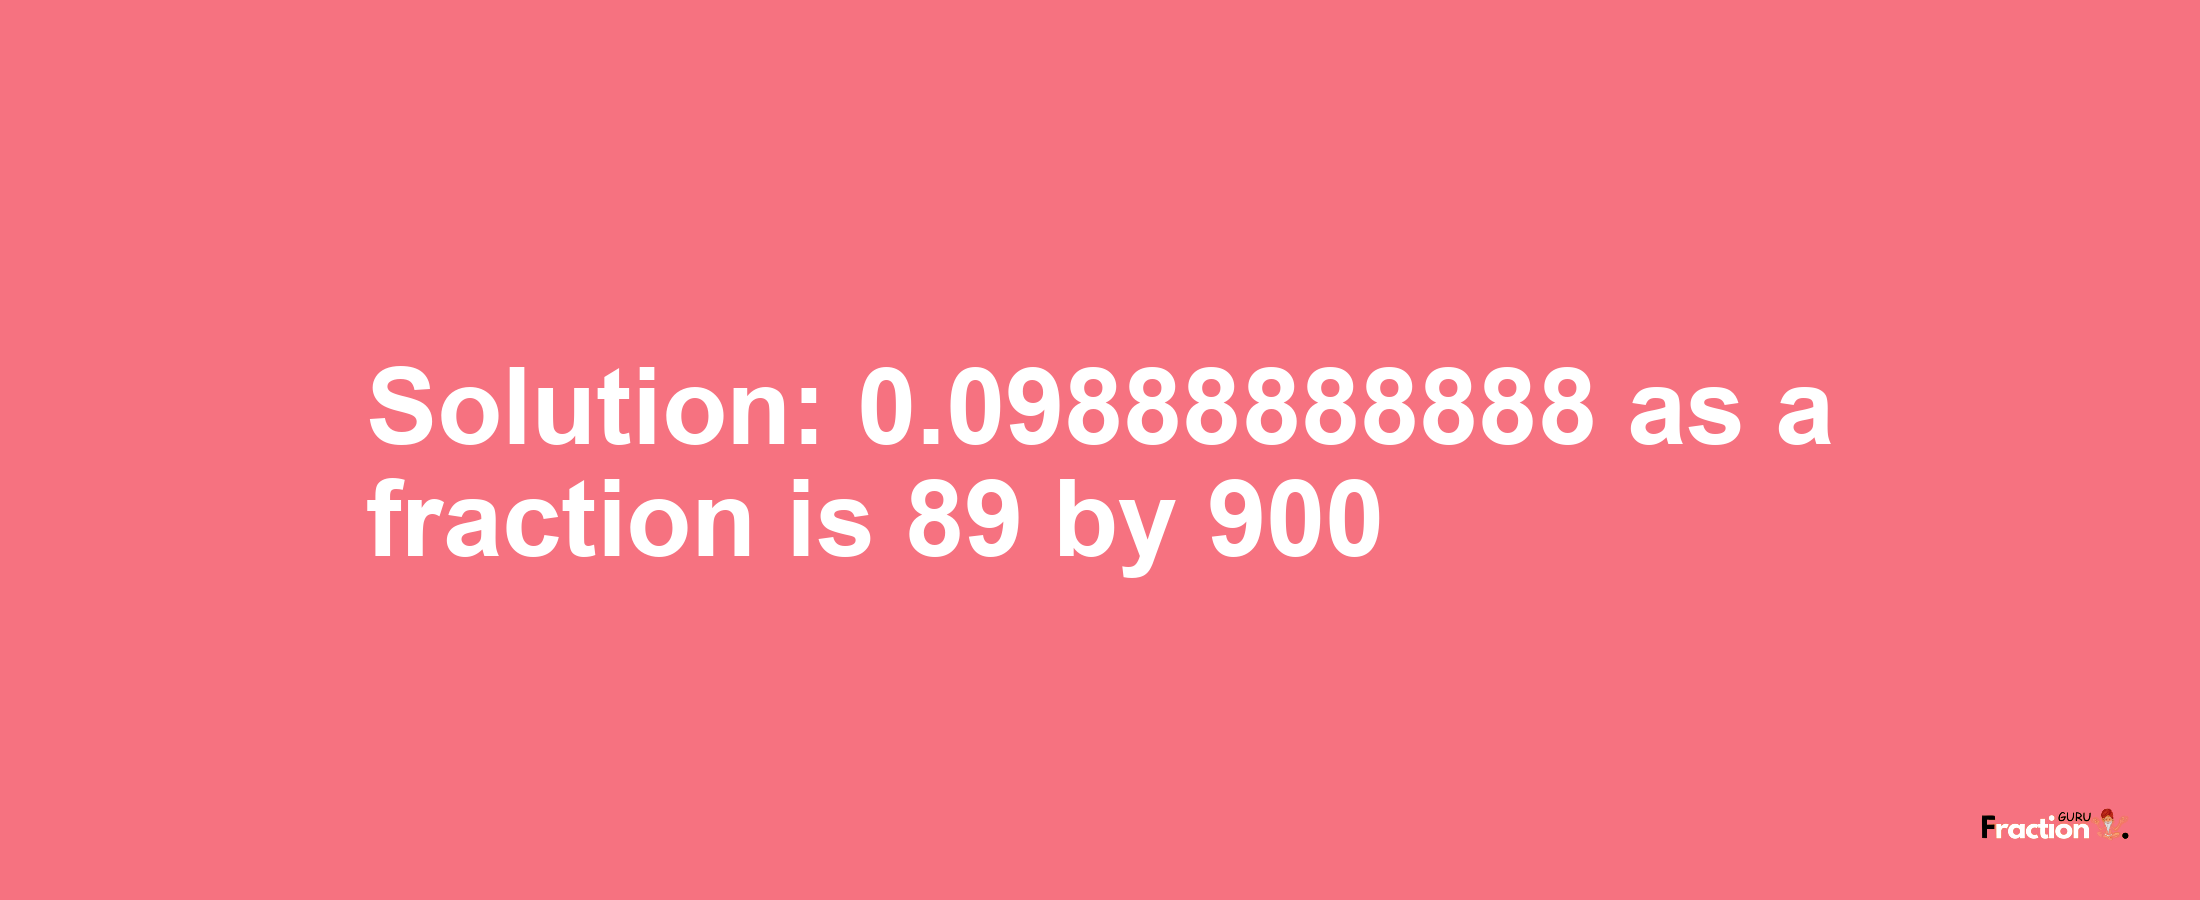 Solution:0.09888888888 as a fraction is 89/900